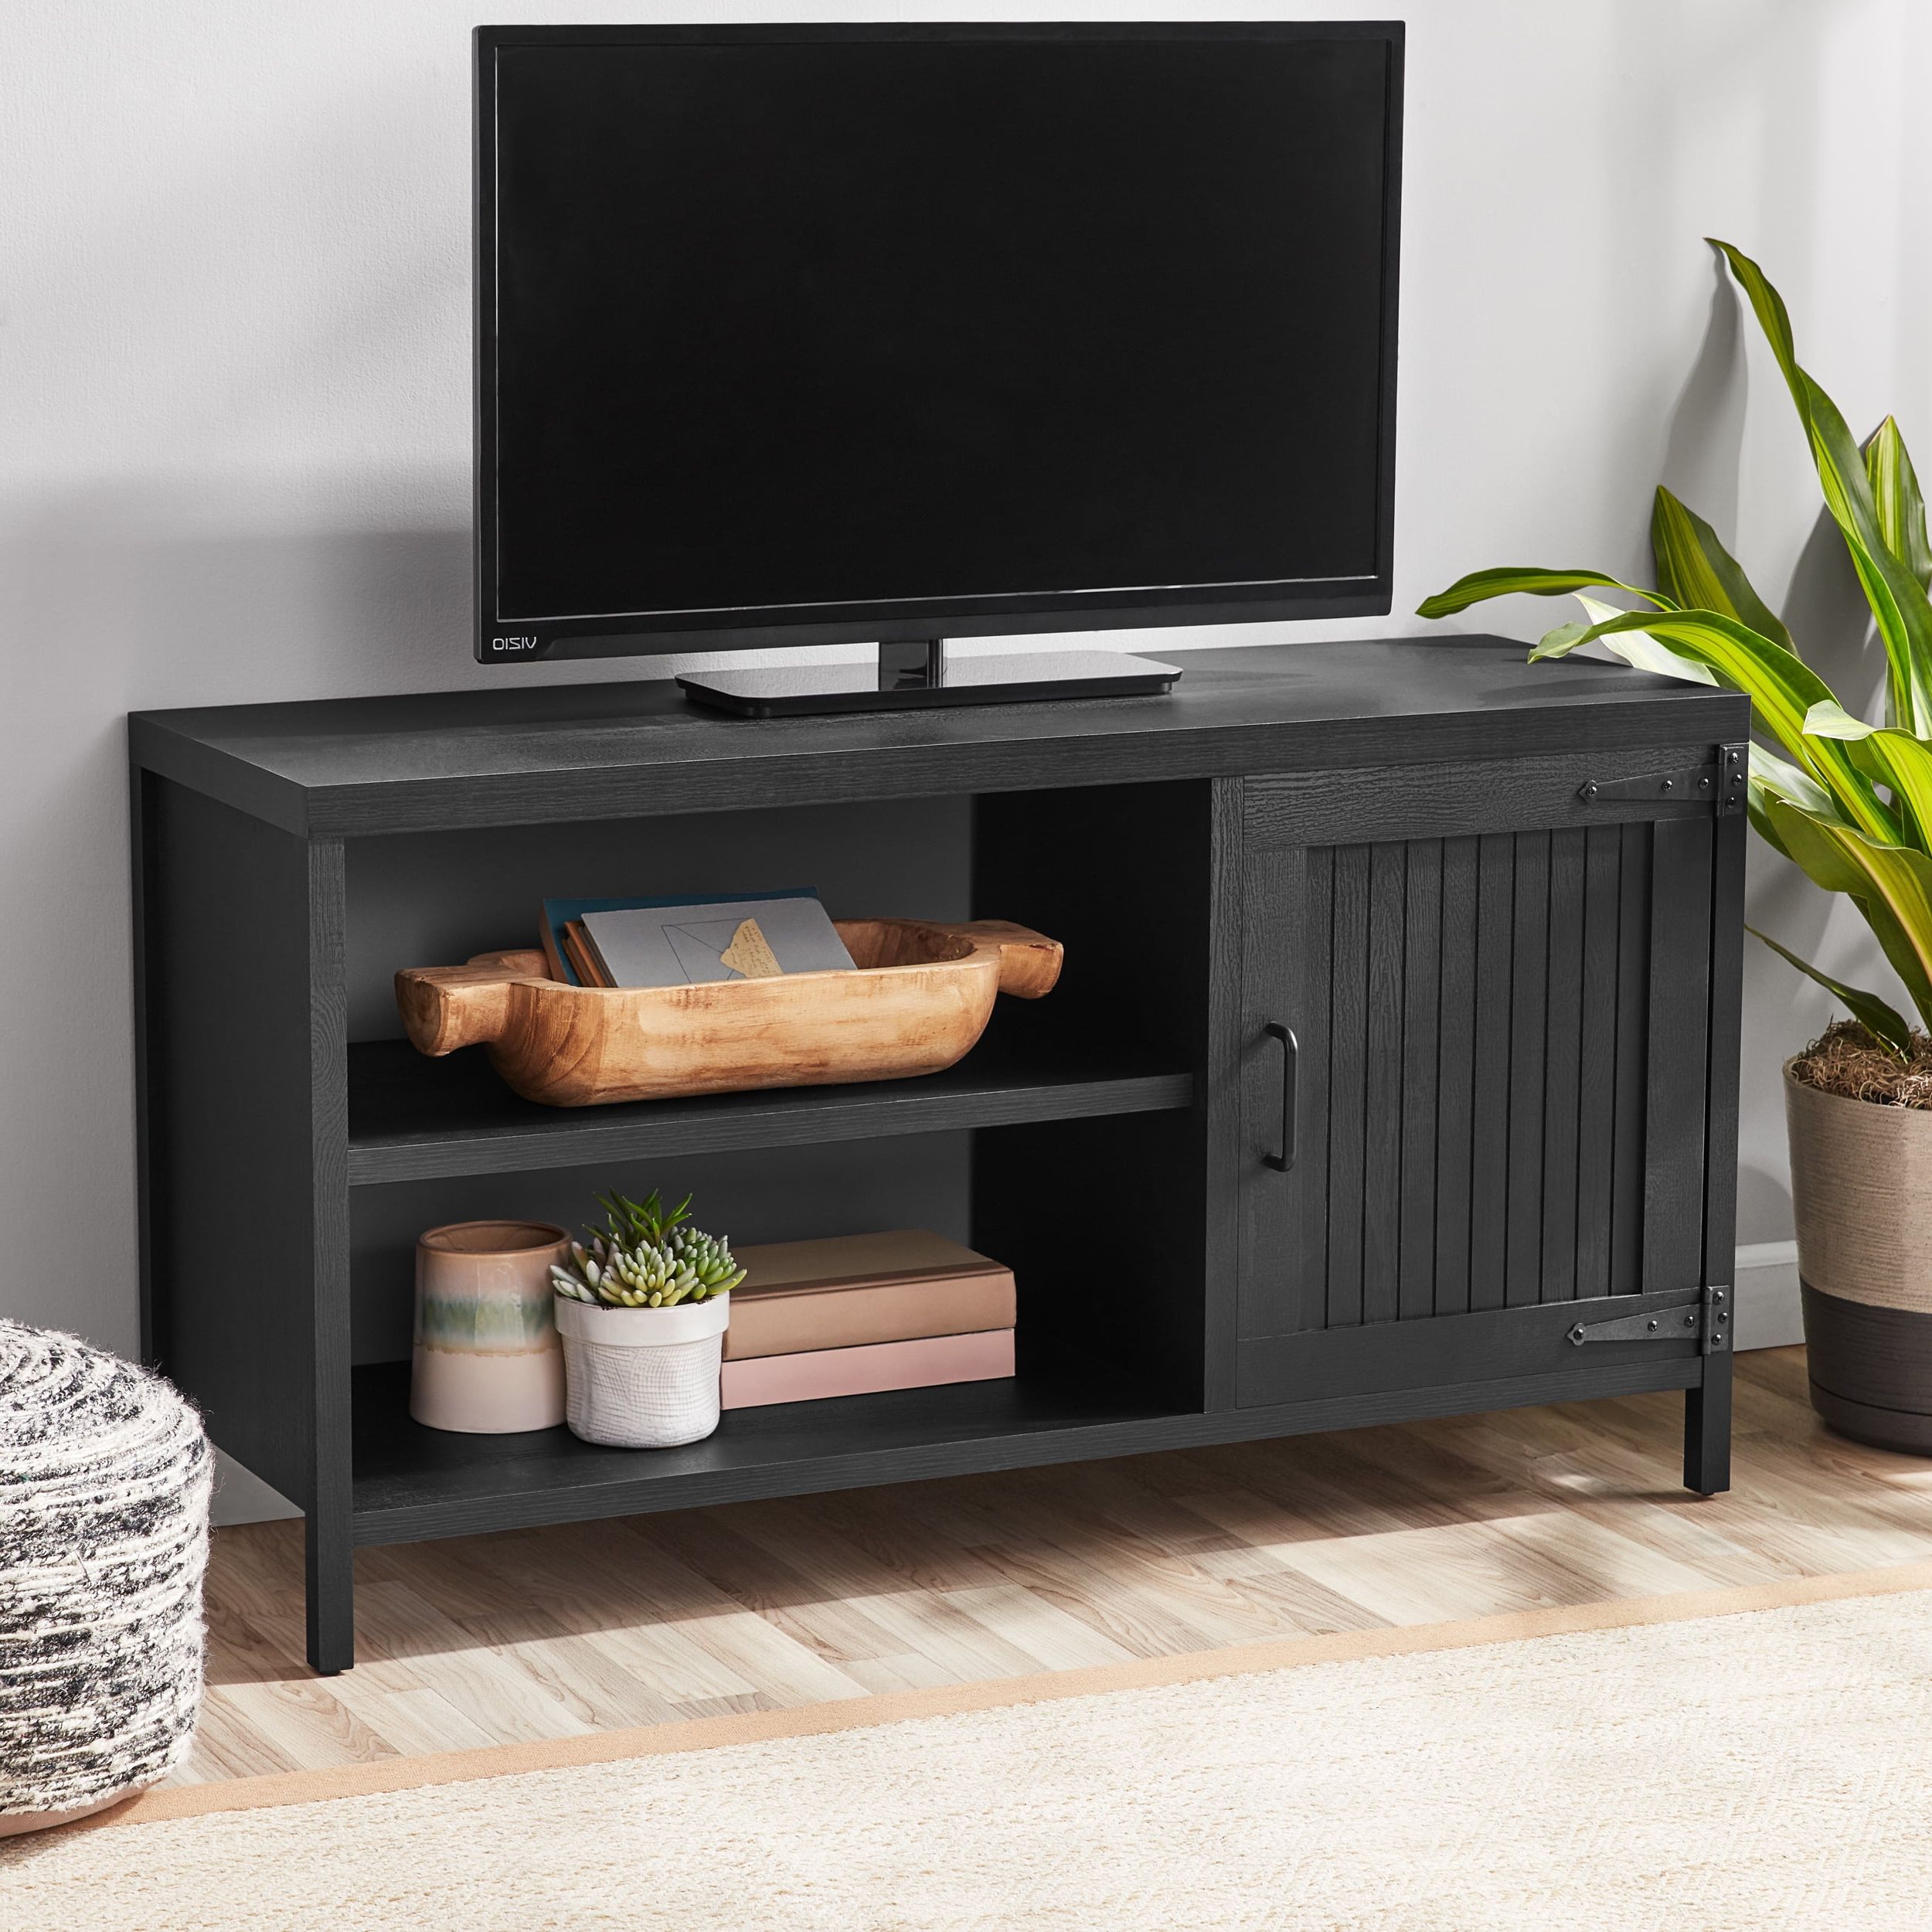 Mainstays Farmhouse Tv Stand For Tvs Up To 50", Black – Walmart Intended For Farmhouse Stands For Tvs (View 7 of 20)